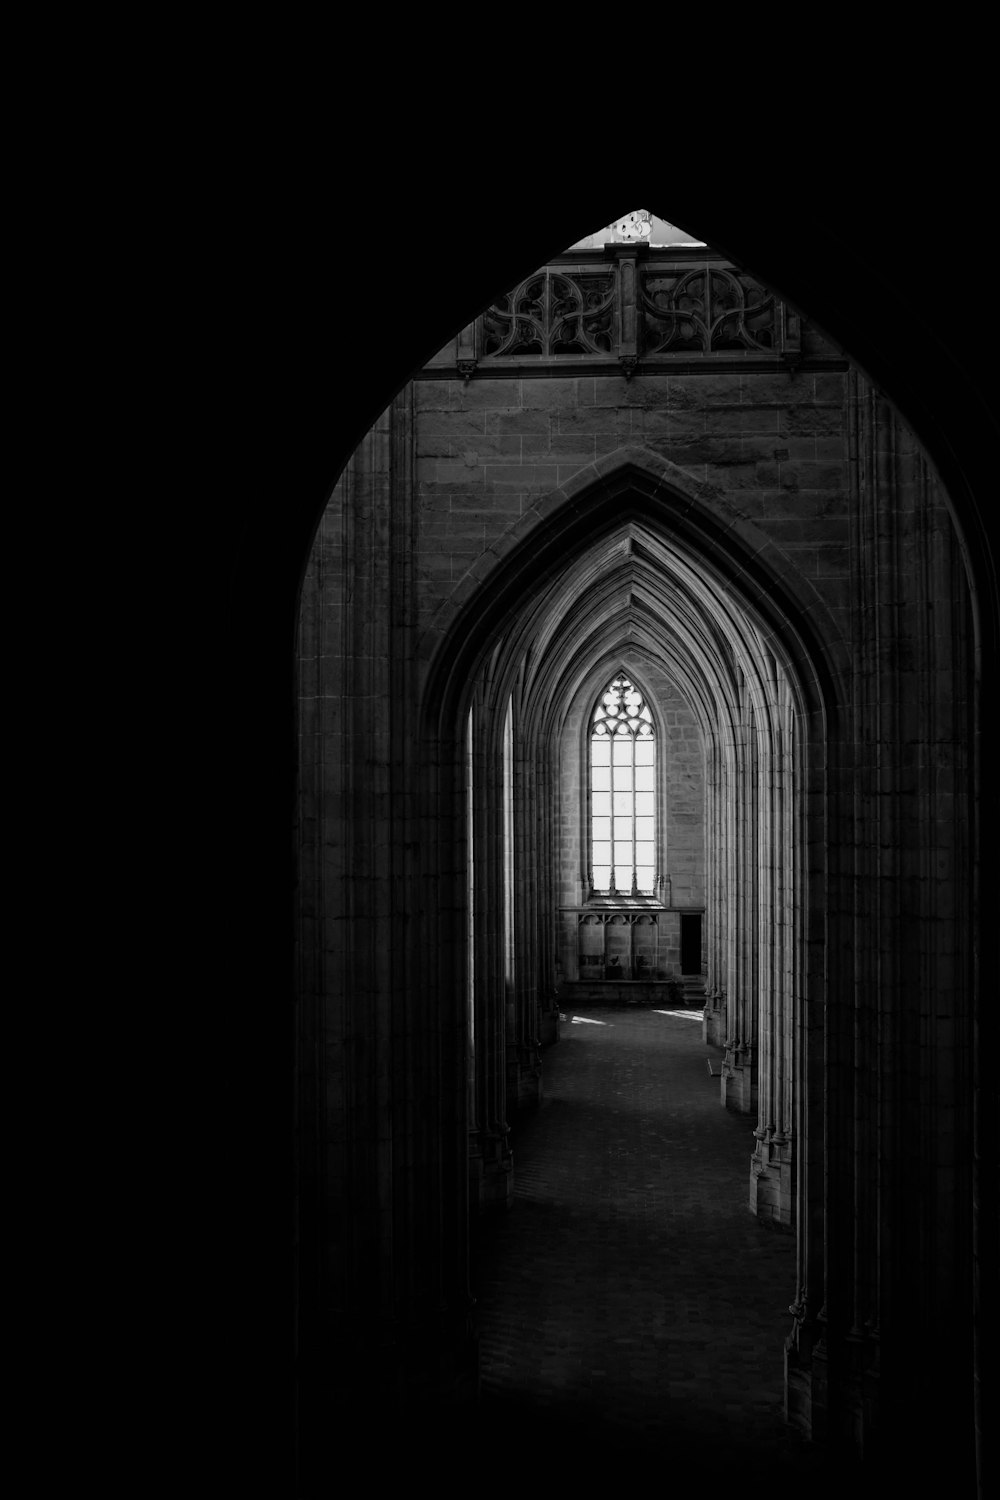 a black and white photo of an arched doorway